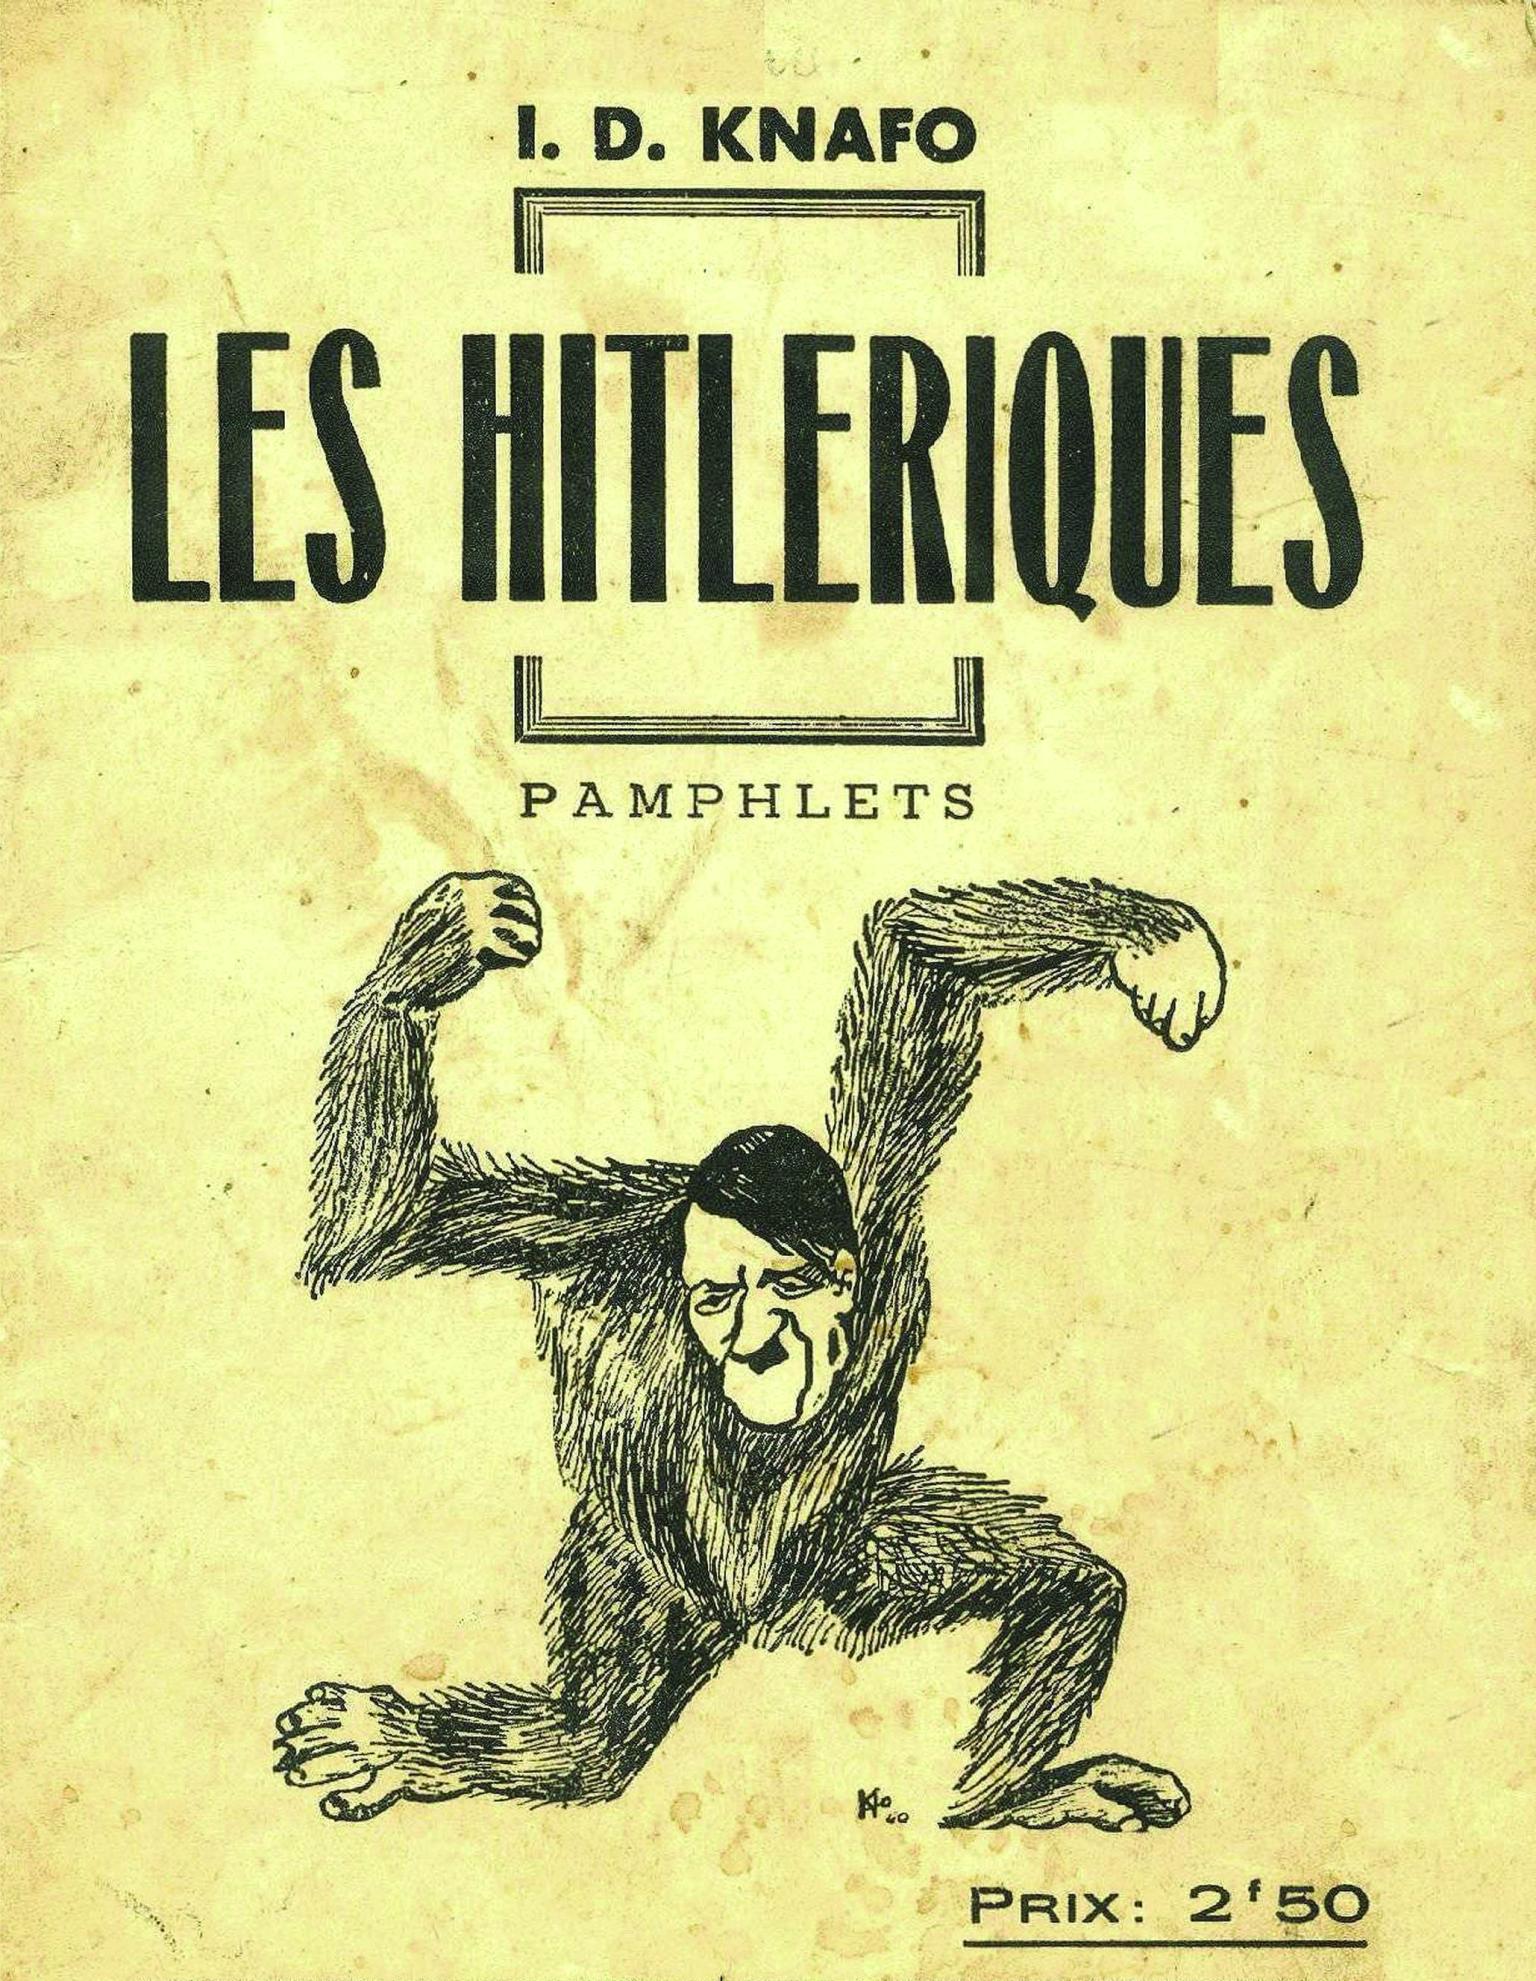 Pamphlet cover page featuring Hitler as an ape in the shape of a swastika with French text. 